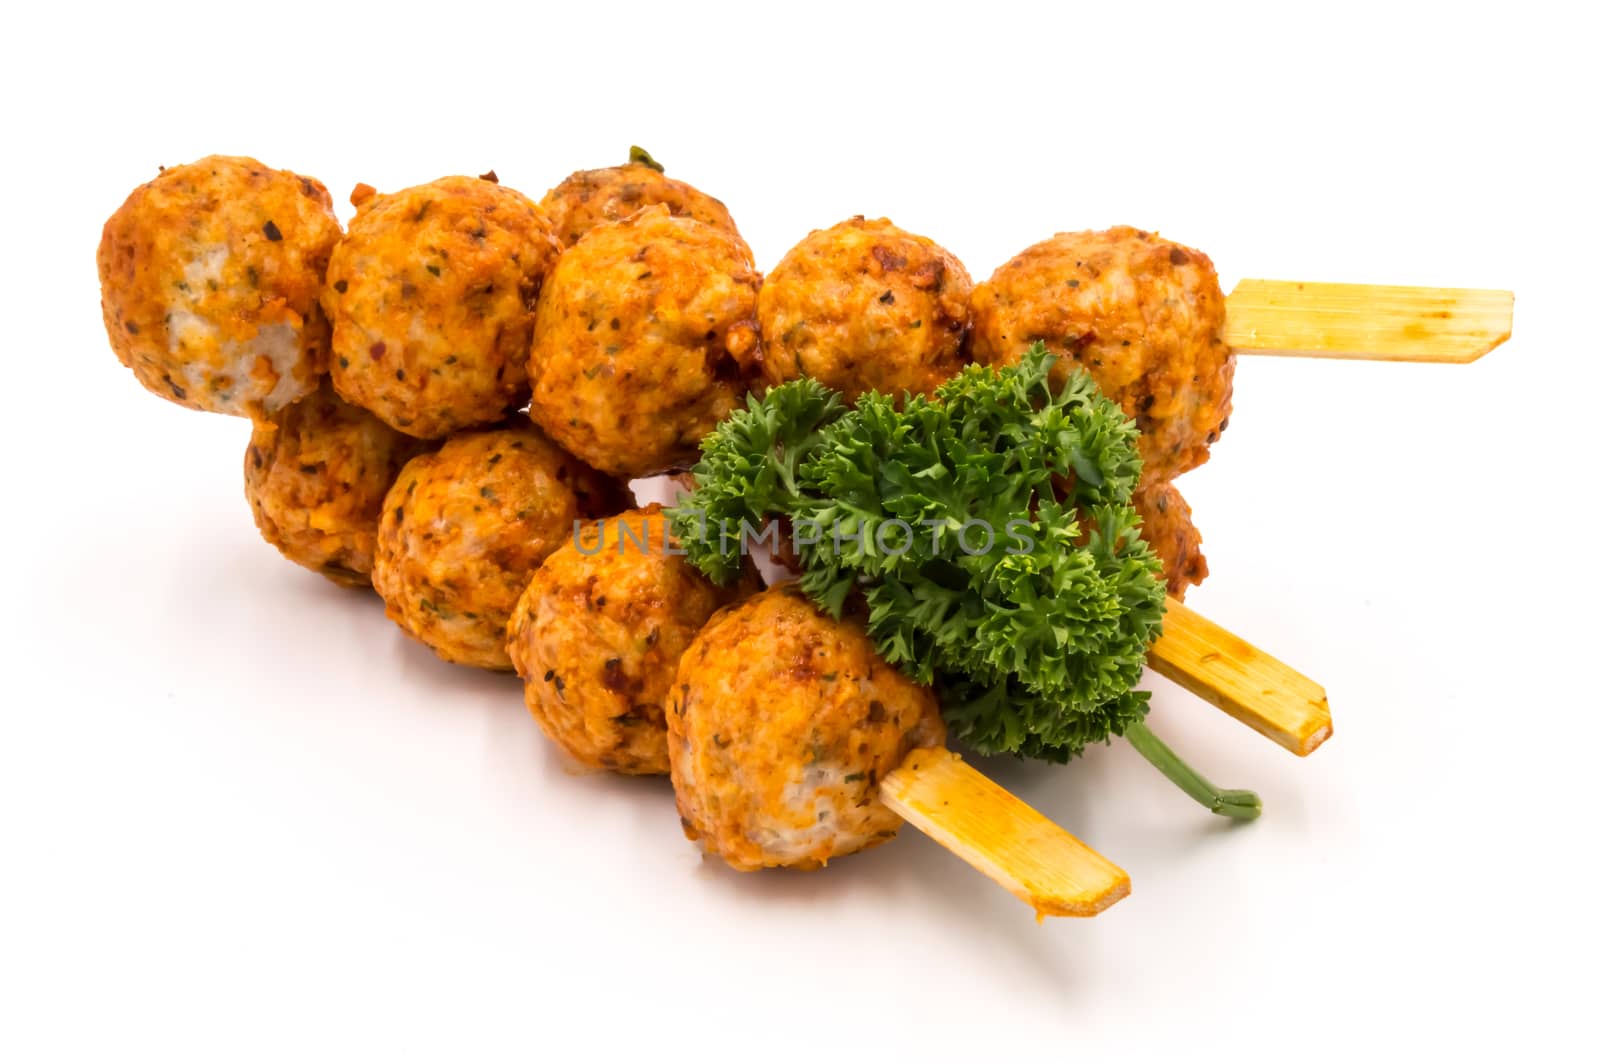 Marinated meatballs skewers on a wooden pick and a white background.